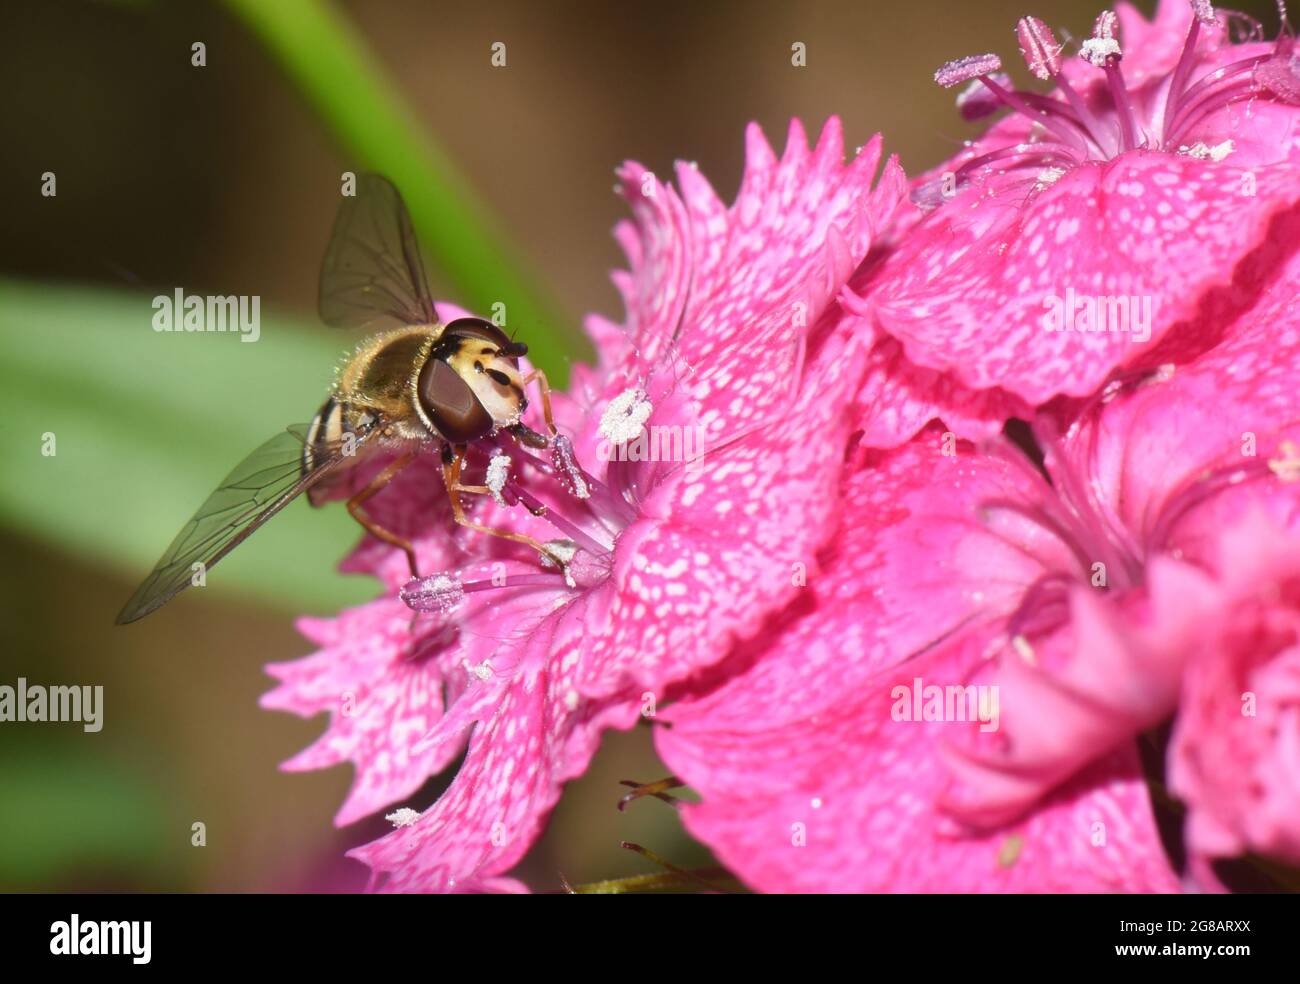 Hoverfly feeding on pollen on Pink Rhodedendron Flowers in the Back Garden, Worcestershire, UK Stock Photo